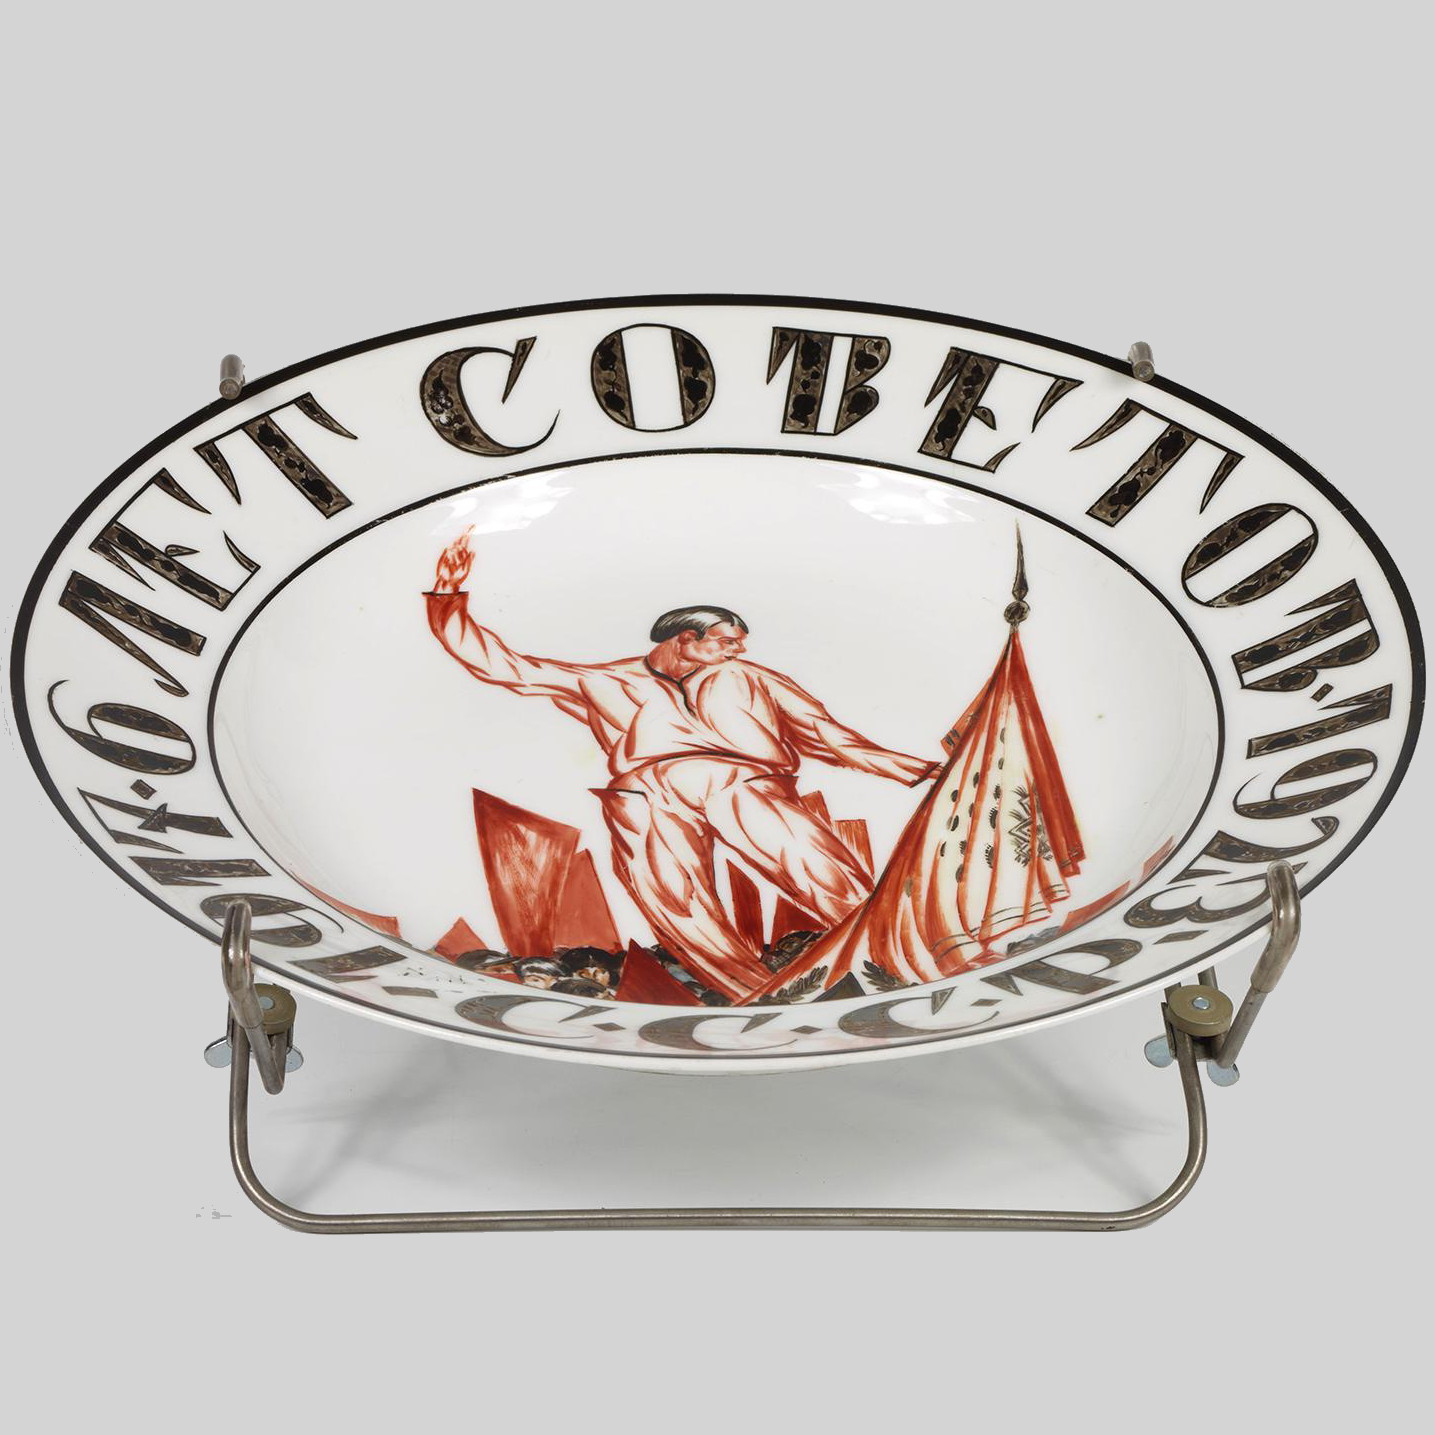 Soviet porcelain platter charger "Worker with the banner" by Gromov